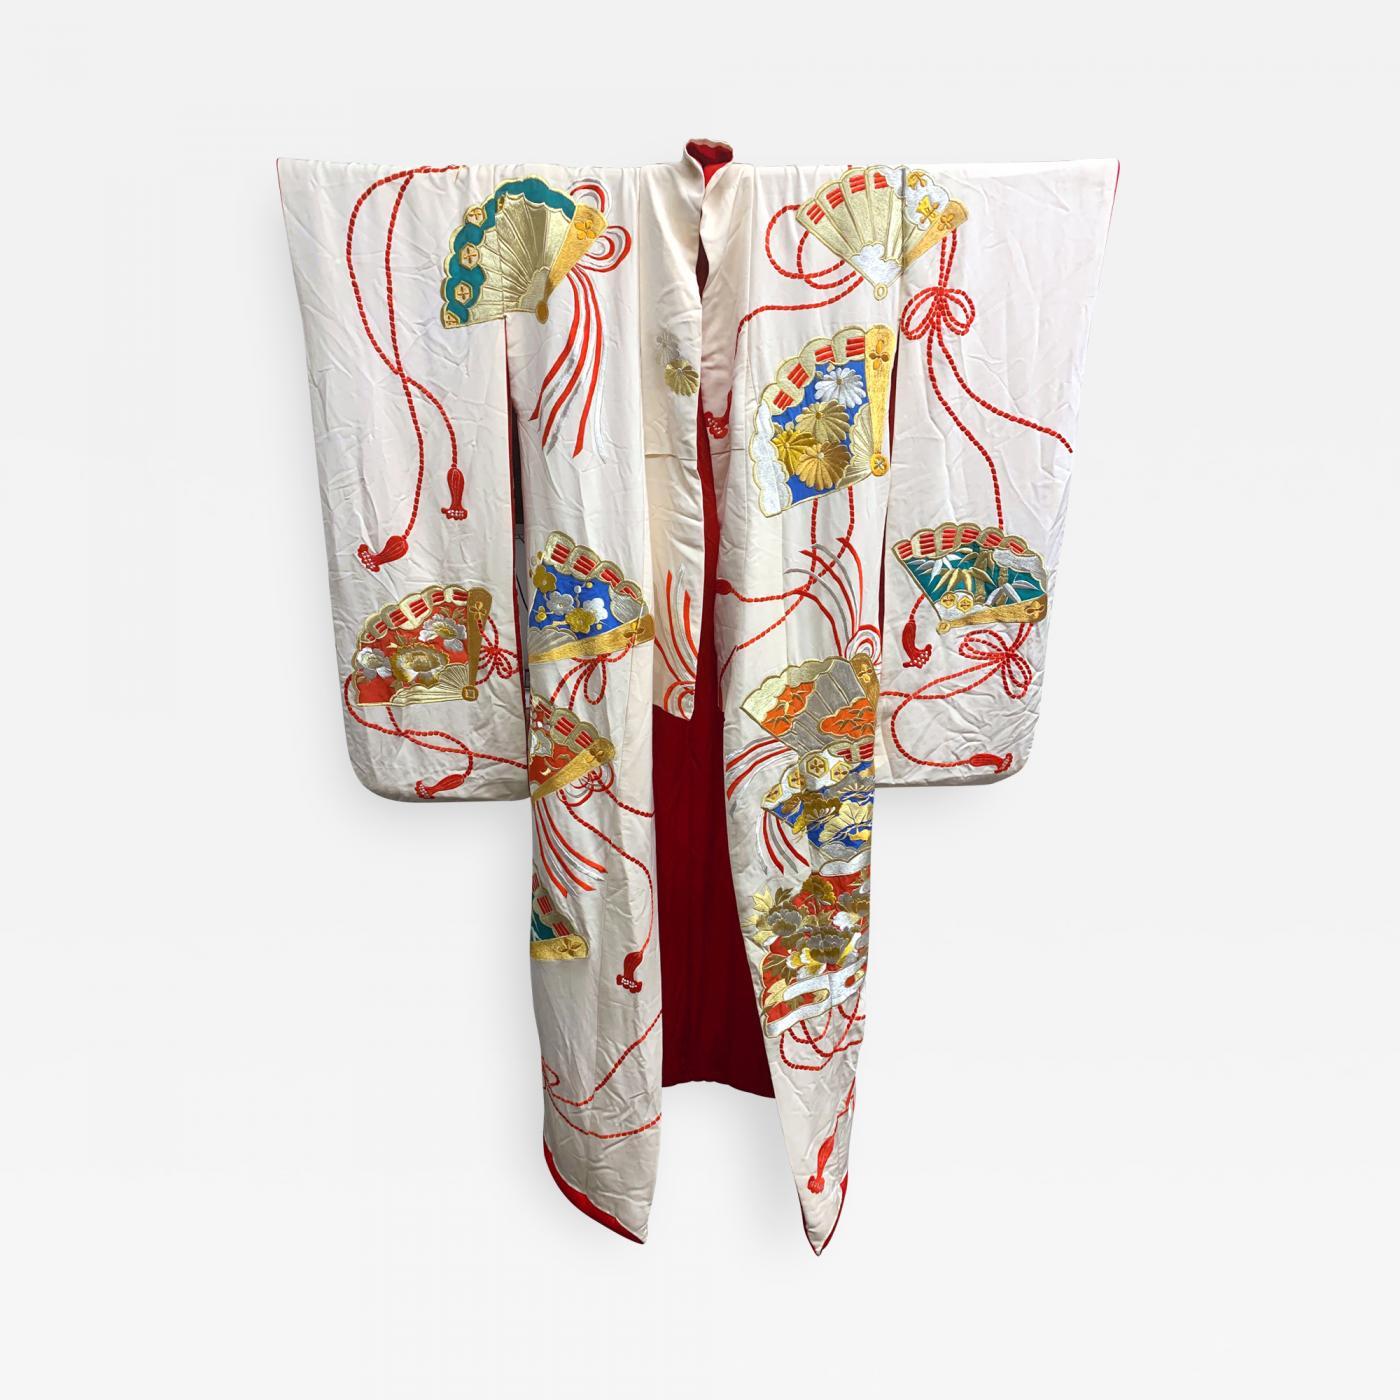 A visually striking vintage Uchikake Wedding Kimono/Robe for ceremonial occasion, circa 1930s-1950s in the Oriental Art Deco style. The bridal garment of a cream white silk features elaborate and intricate embroidery of motifs of highly decorated